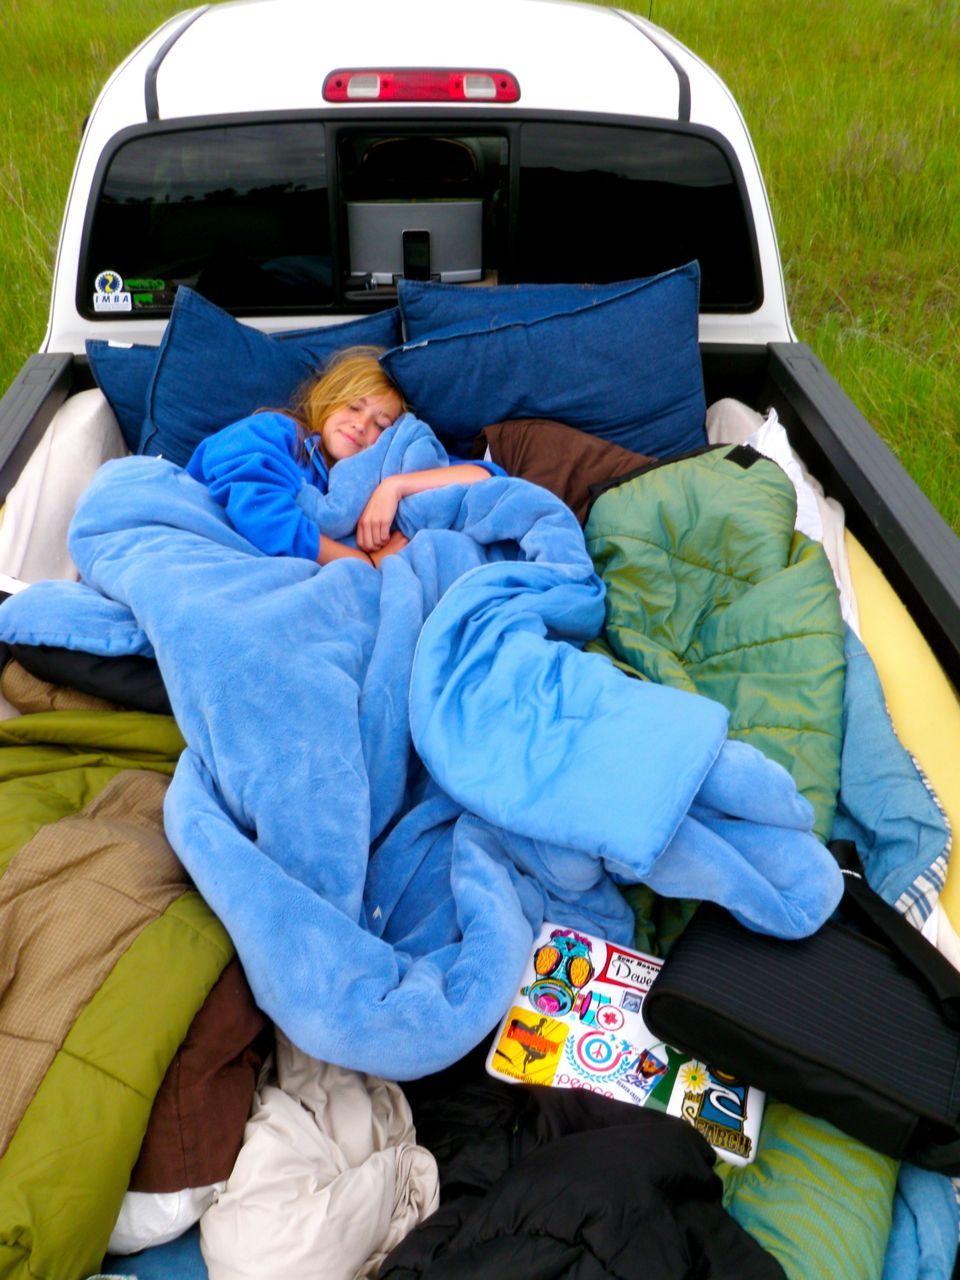 Fill a truck bed full of pillows and blankets and drive to the middle of nowhere